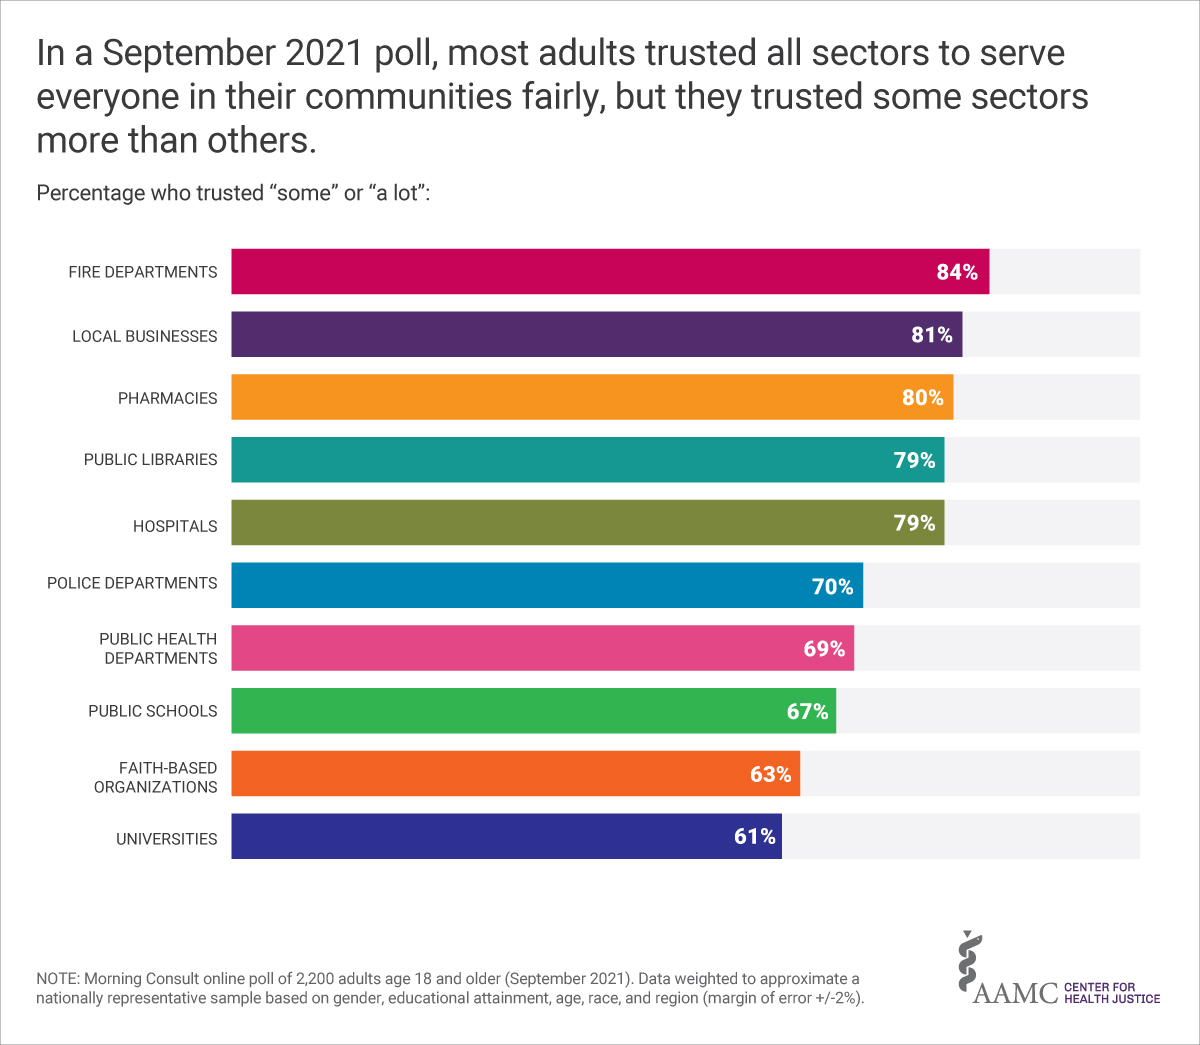 Infographic showing the total percentage of adults who trust each sector to treat all people fairly.